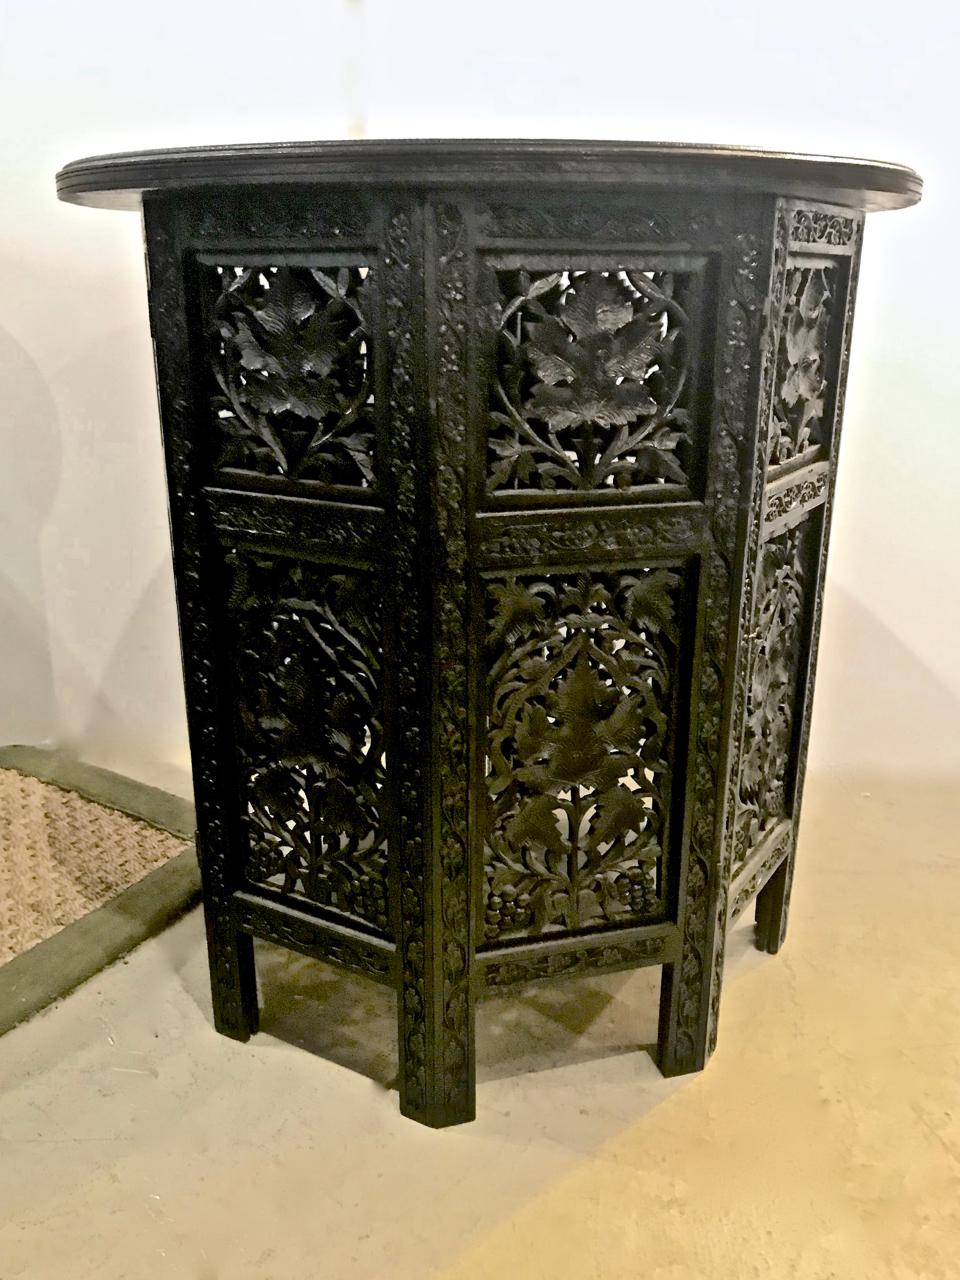 This is a highly decorative pair of mid-20th century Indian carved folding tables. The tables feature finely incised botanical carving and an incised top surface. The incised detailing on one table is partially obscured